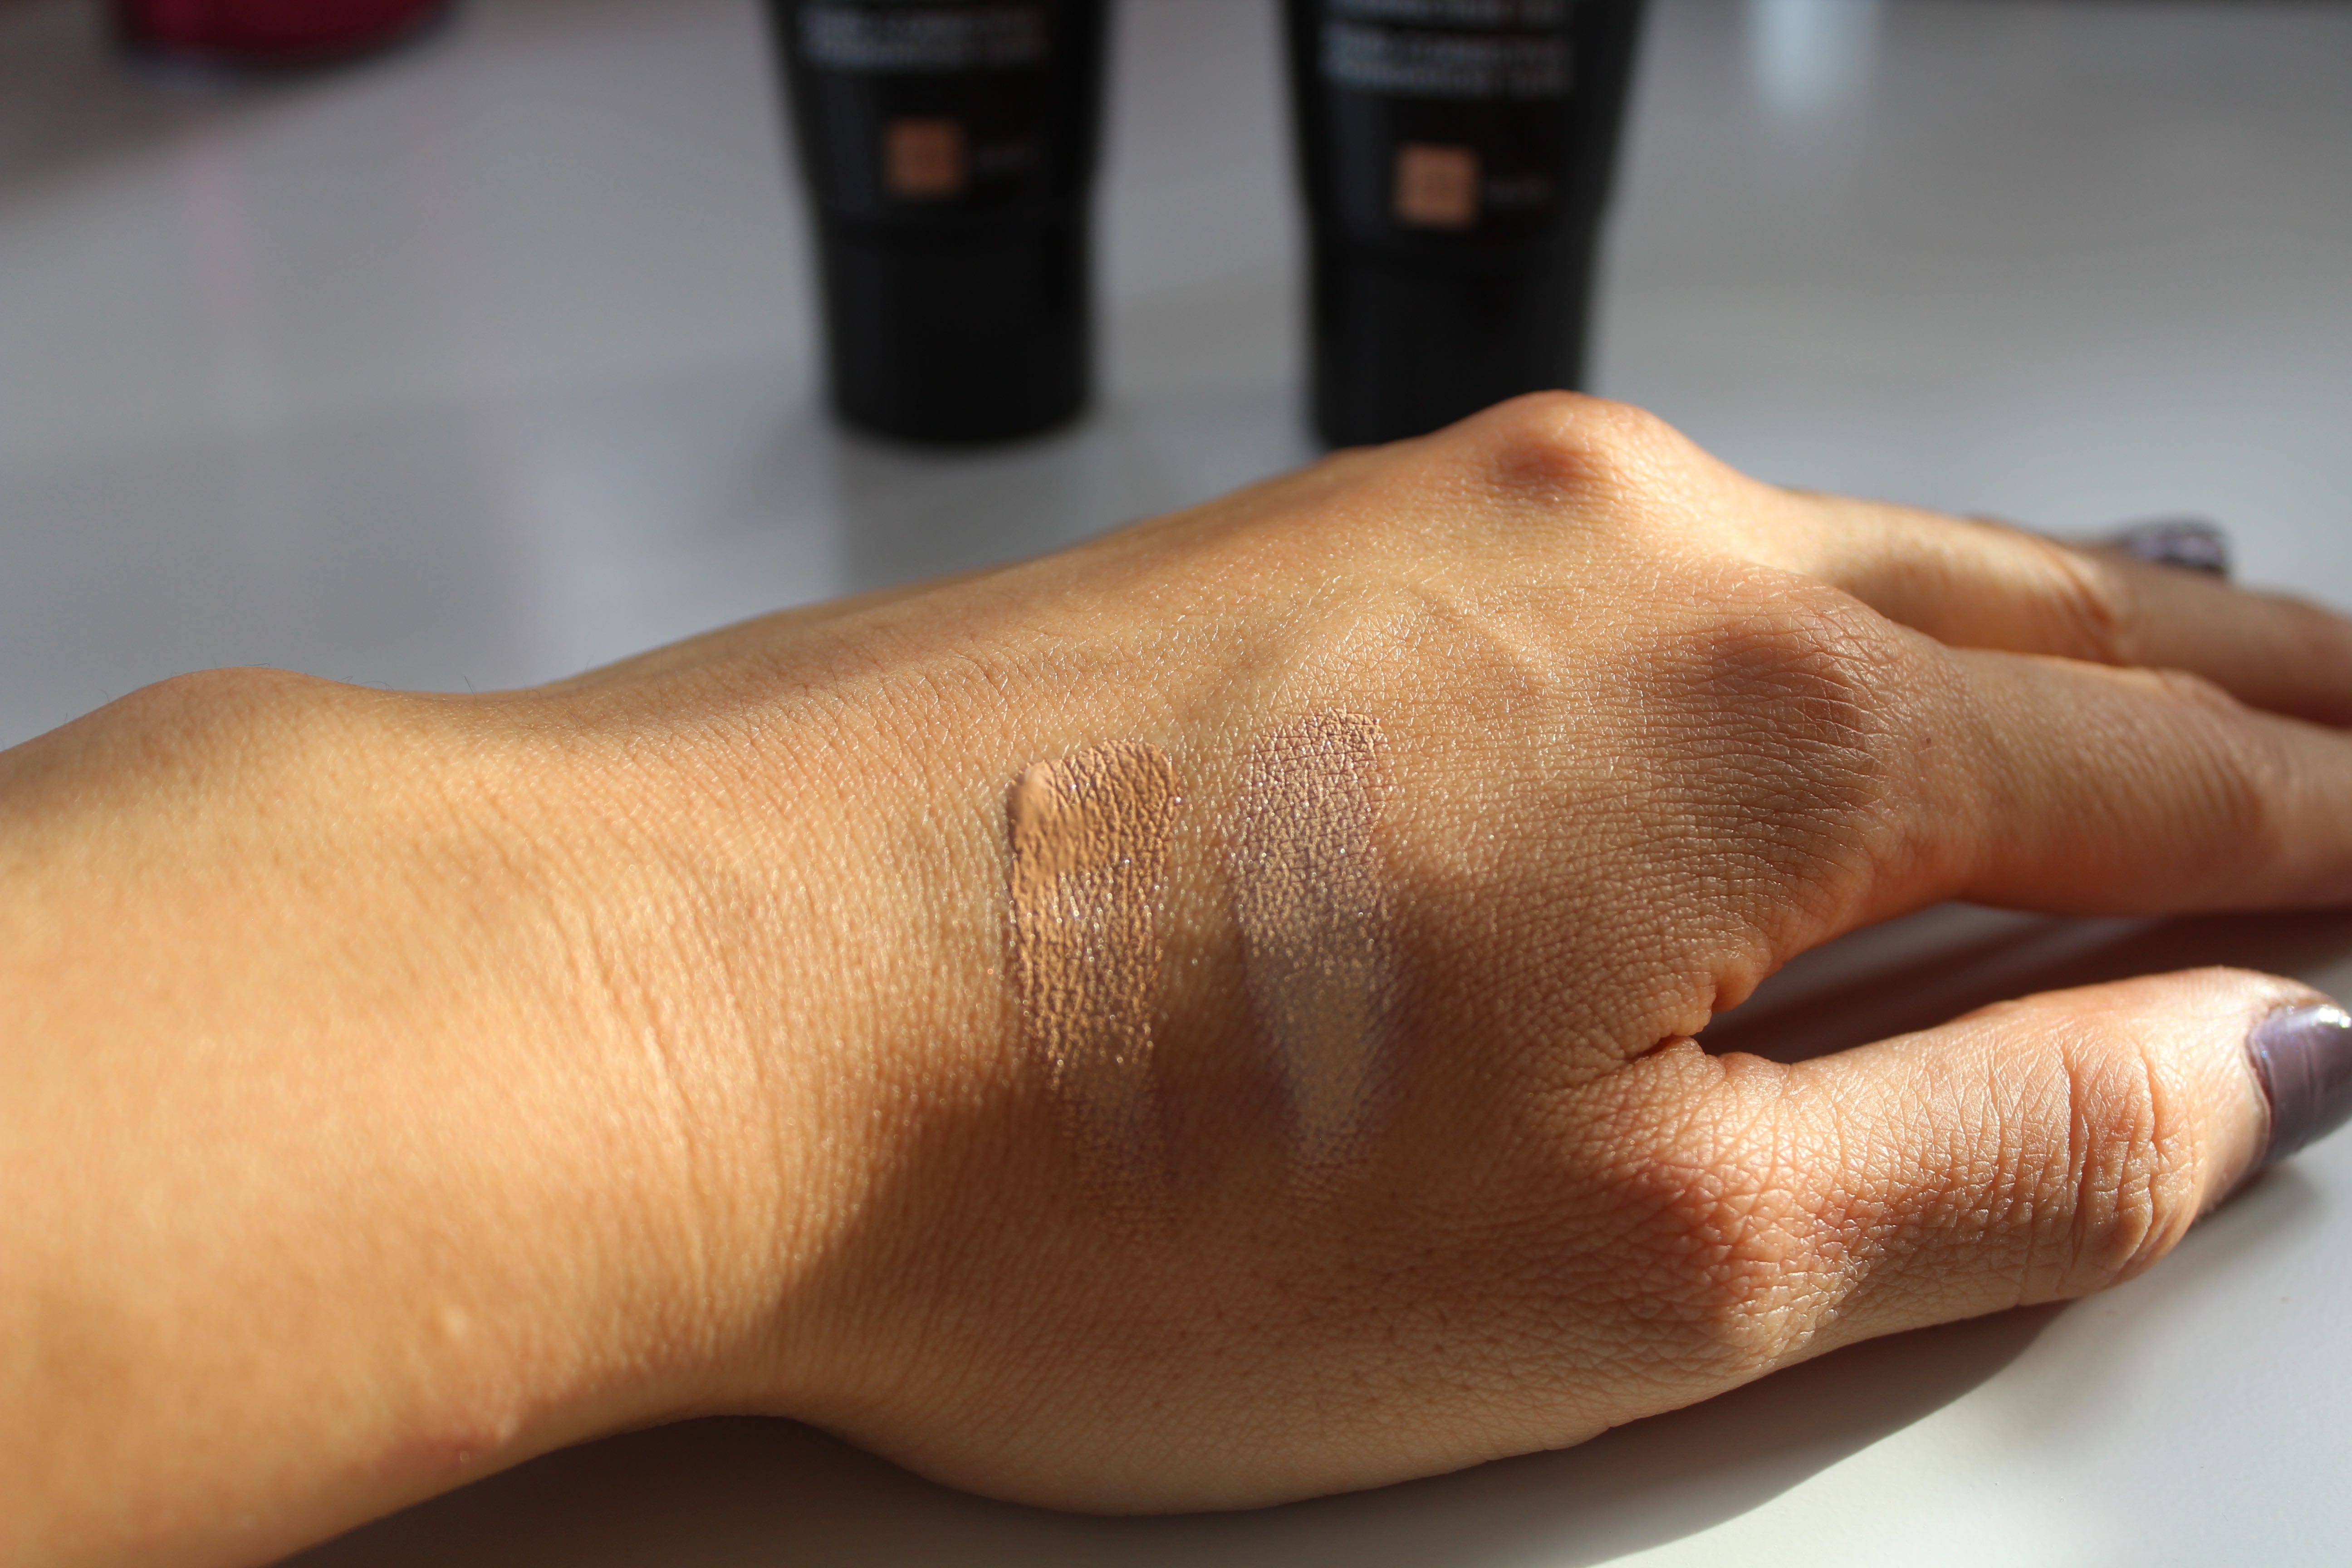 DERMABLEND Corrective Foundation MAKEUP - FLUID review by Facemadeup.com